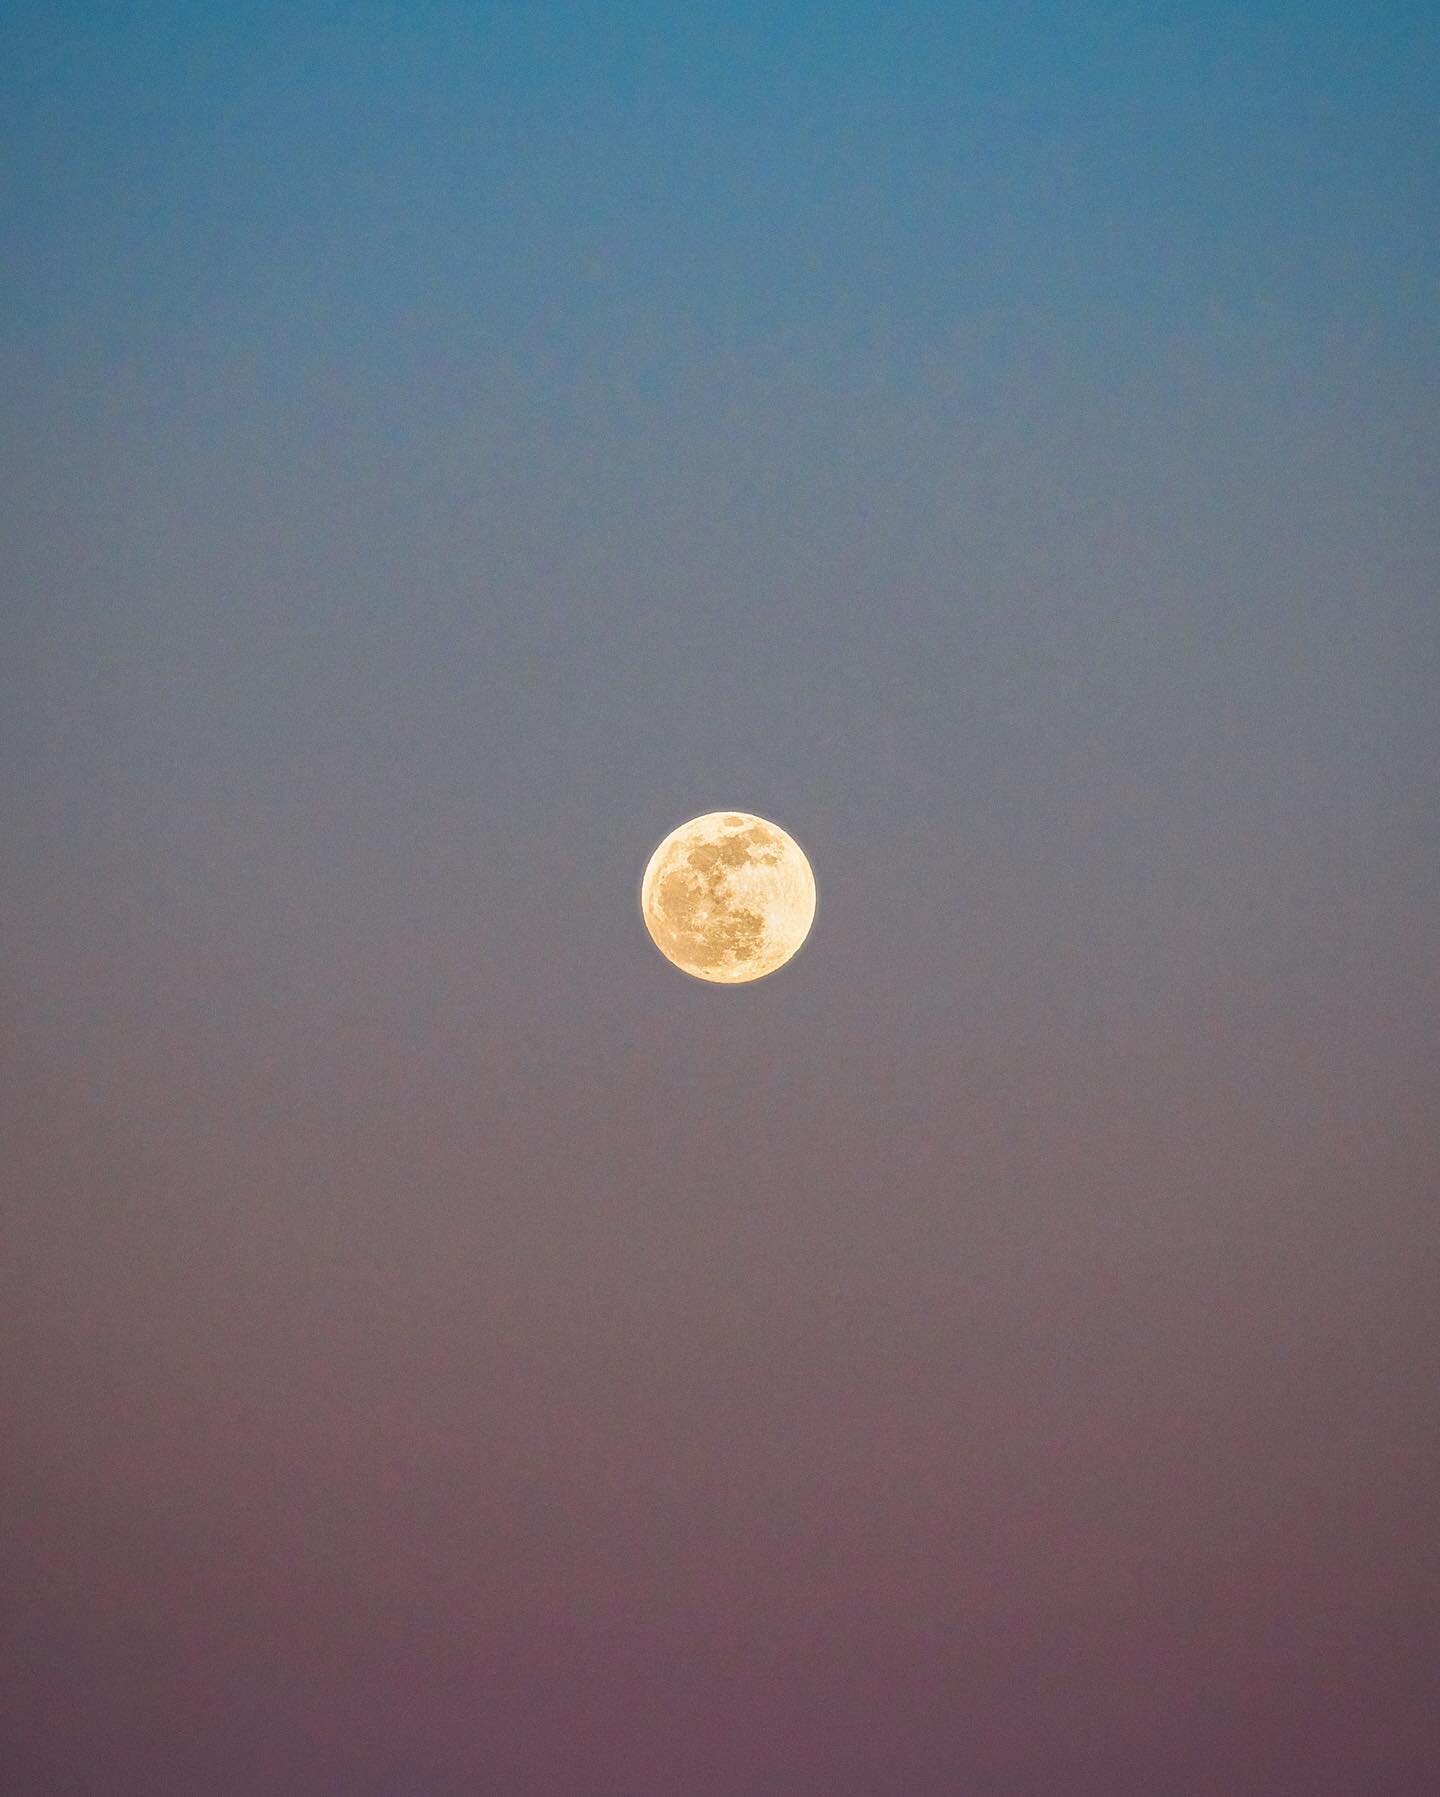 Super moon ...
👉 swipe for a closer look at the super moon
.
.
.
🖼 The super moon during the blue hour.

📸 Captured in Amman.

📷 Shot with @canonme EOS-R ( EF 70-200mm, F2.8 ).

💻 Edited with Adobe Lightroom Classic and merged in photoshop
.
.
.